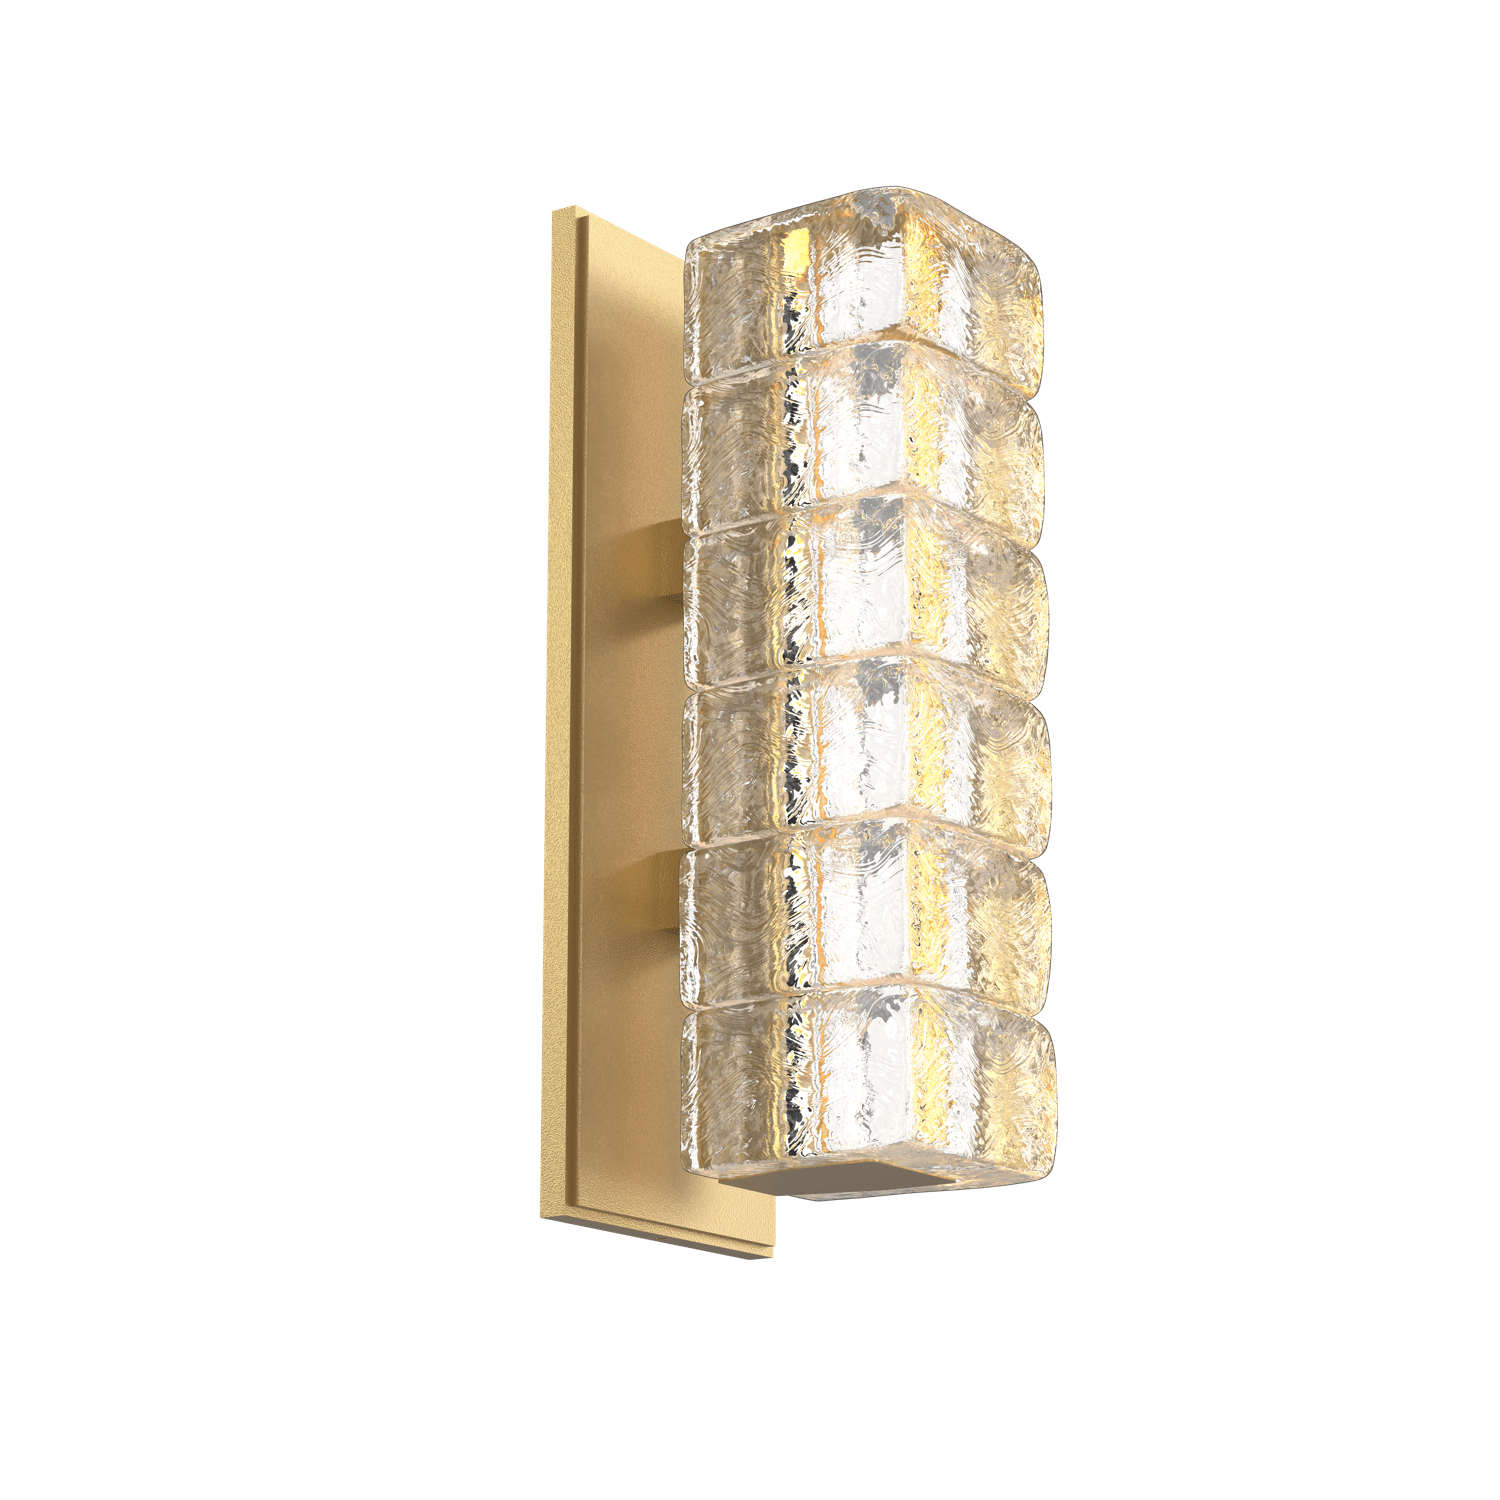 IDB0080-01-GB-Hammerton-Studio-Asscher-wall-sconce-with-gilded-brass-finish-and-clear-cast-glass-shades-and-LED-lamping